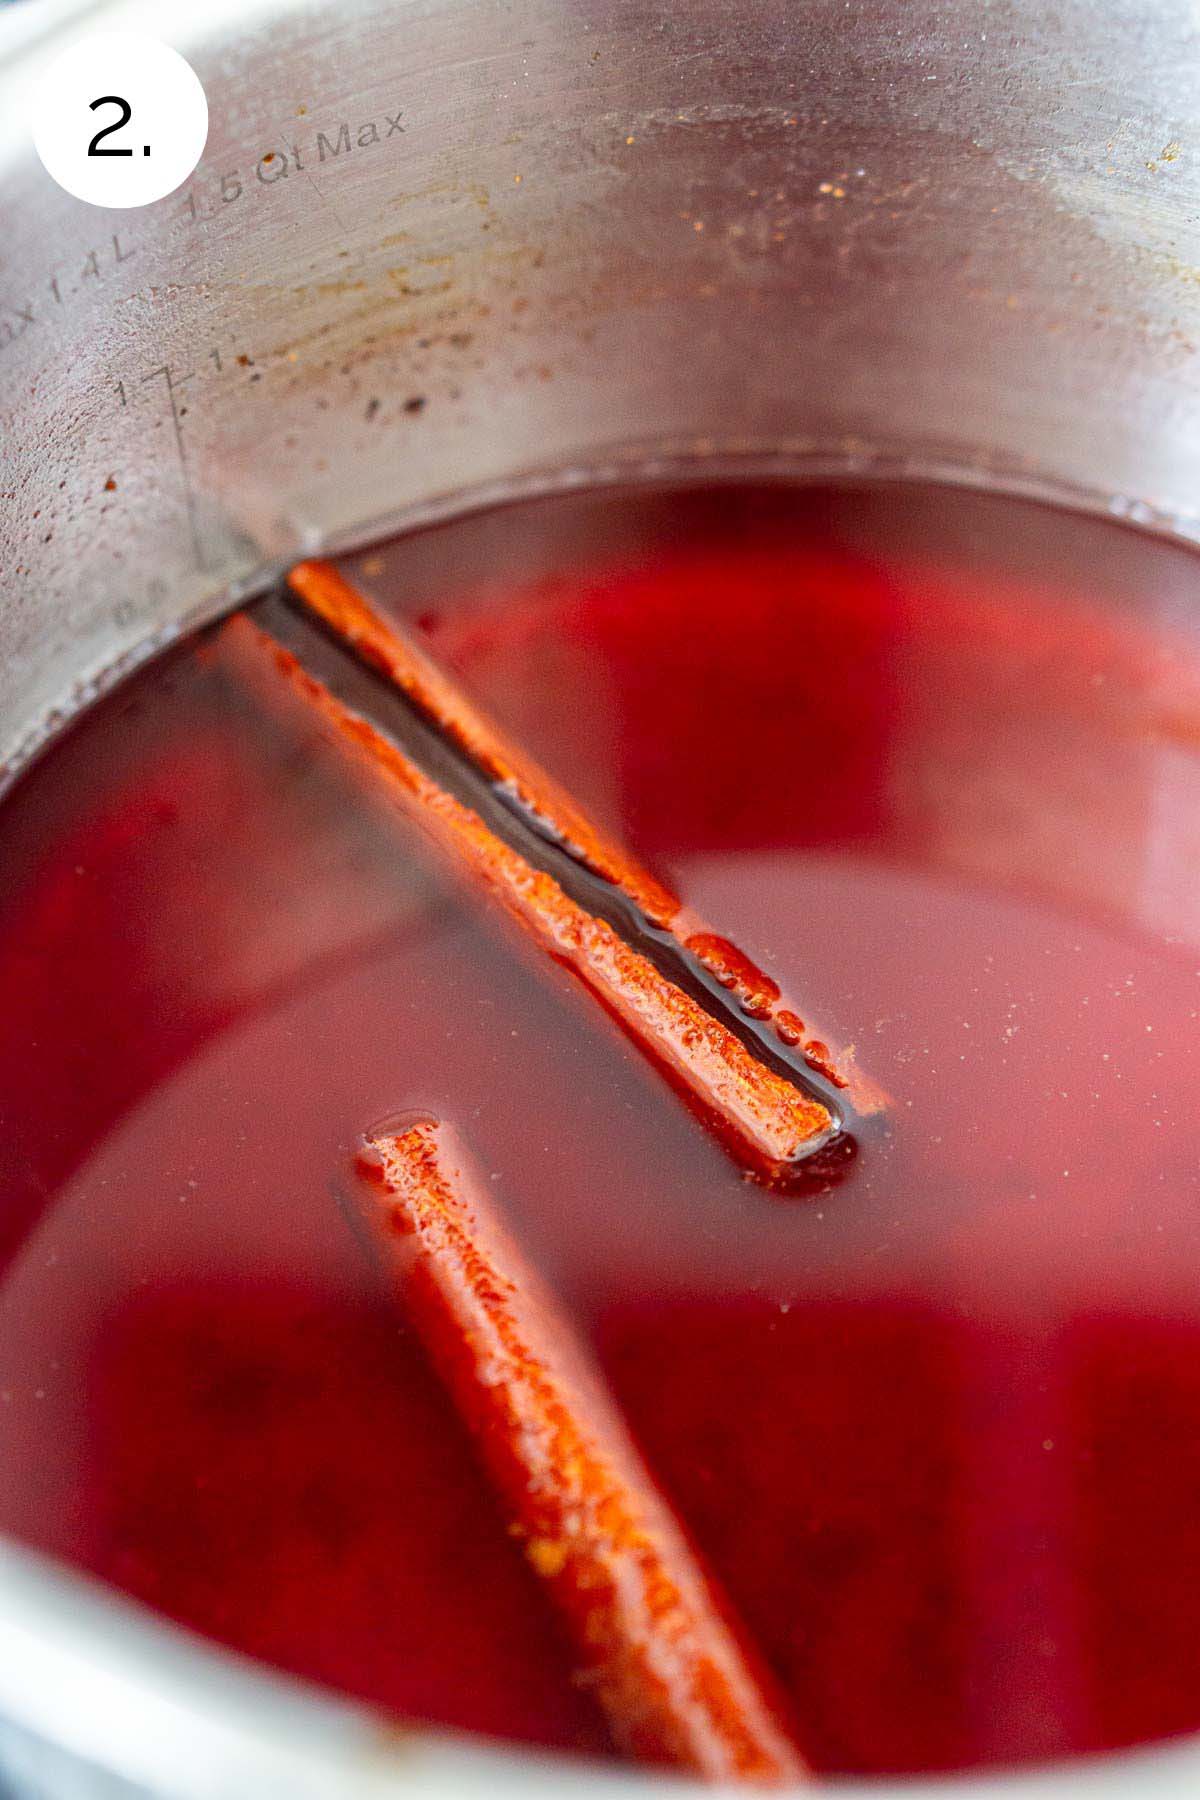 Steeping the cranberry juice in a small stainless steel saucepan with the cinnamon sticks and spices.